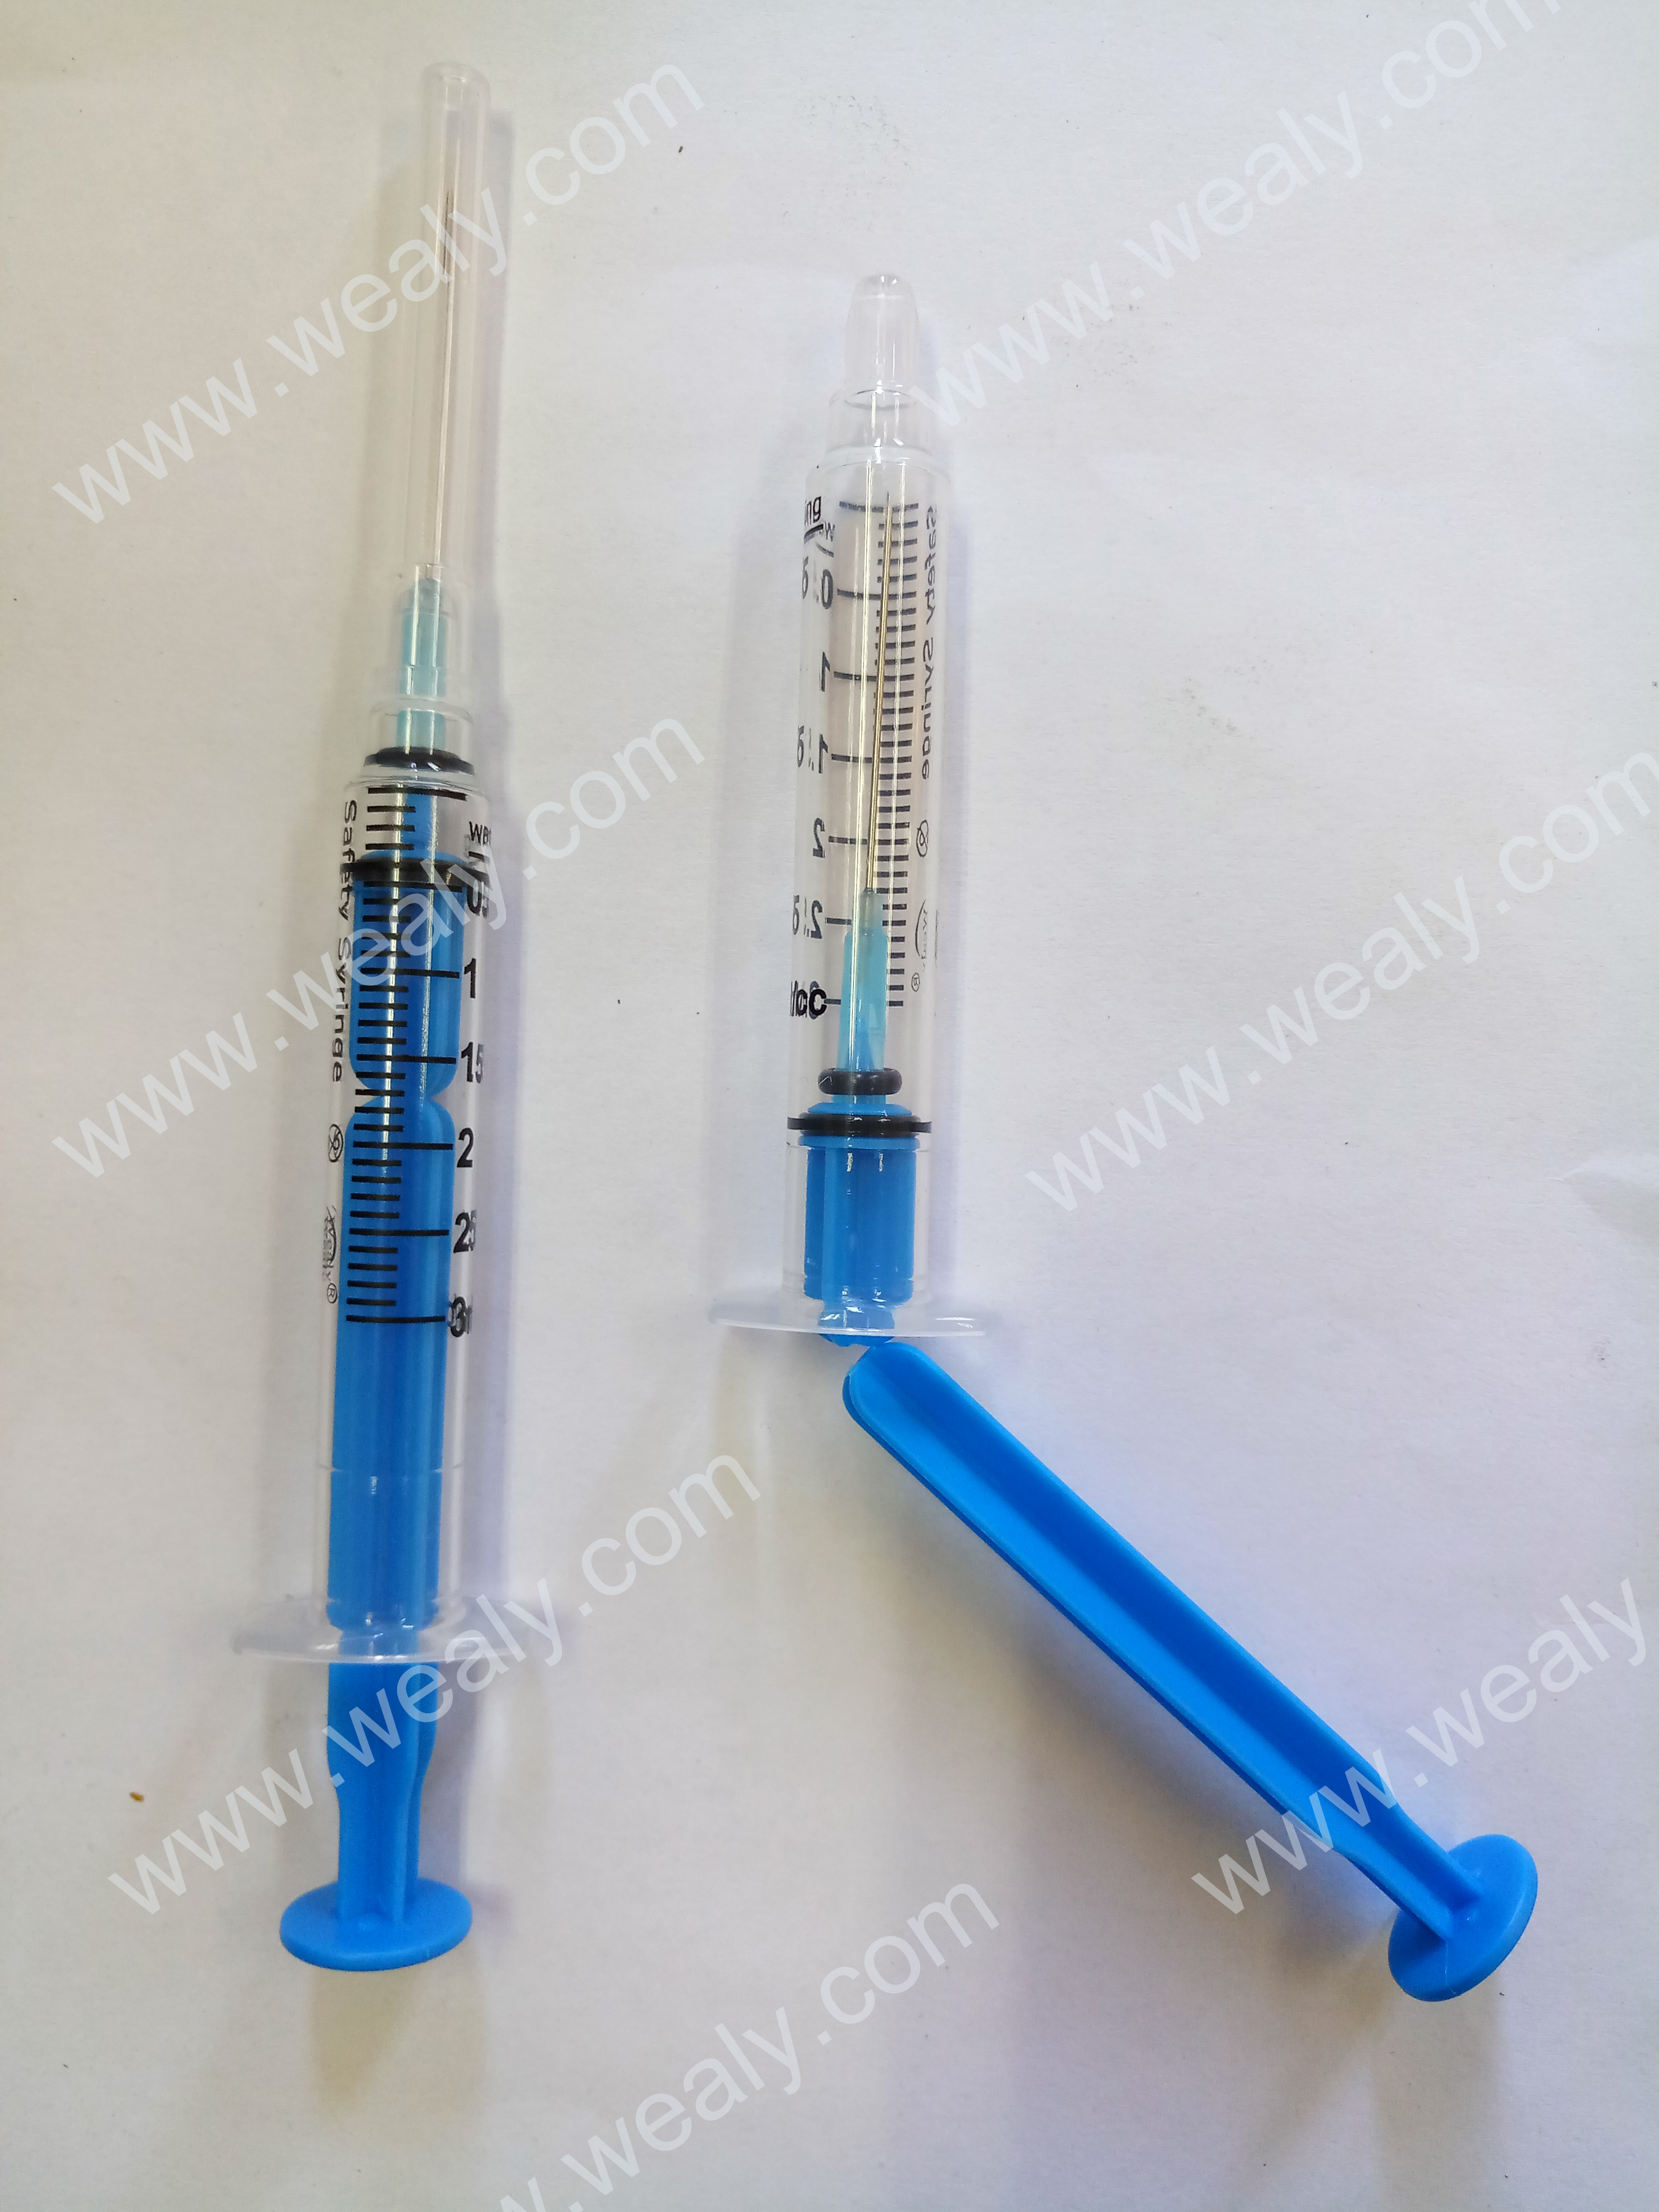 Safety Syringes( Auto-Disable )